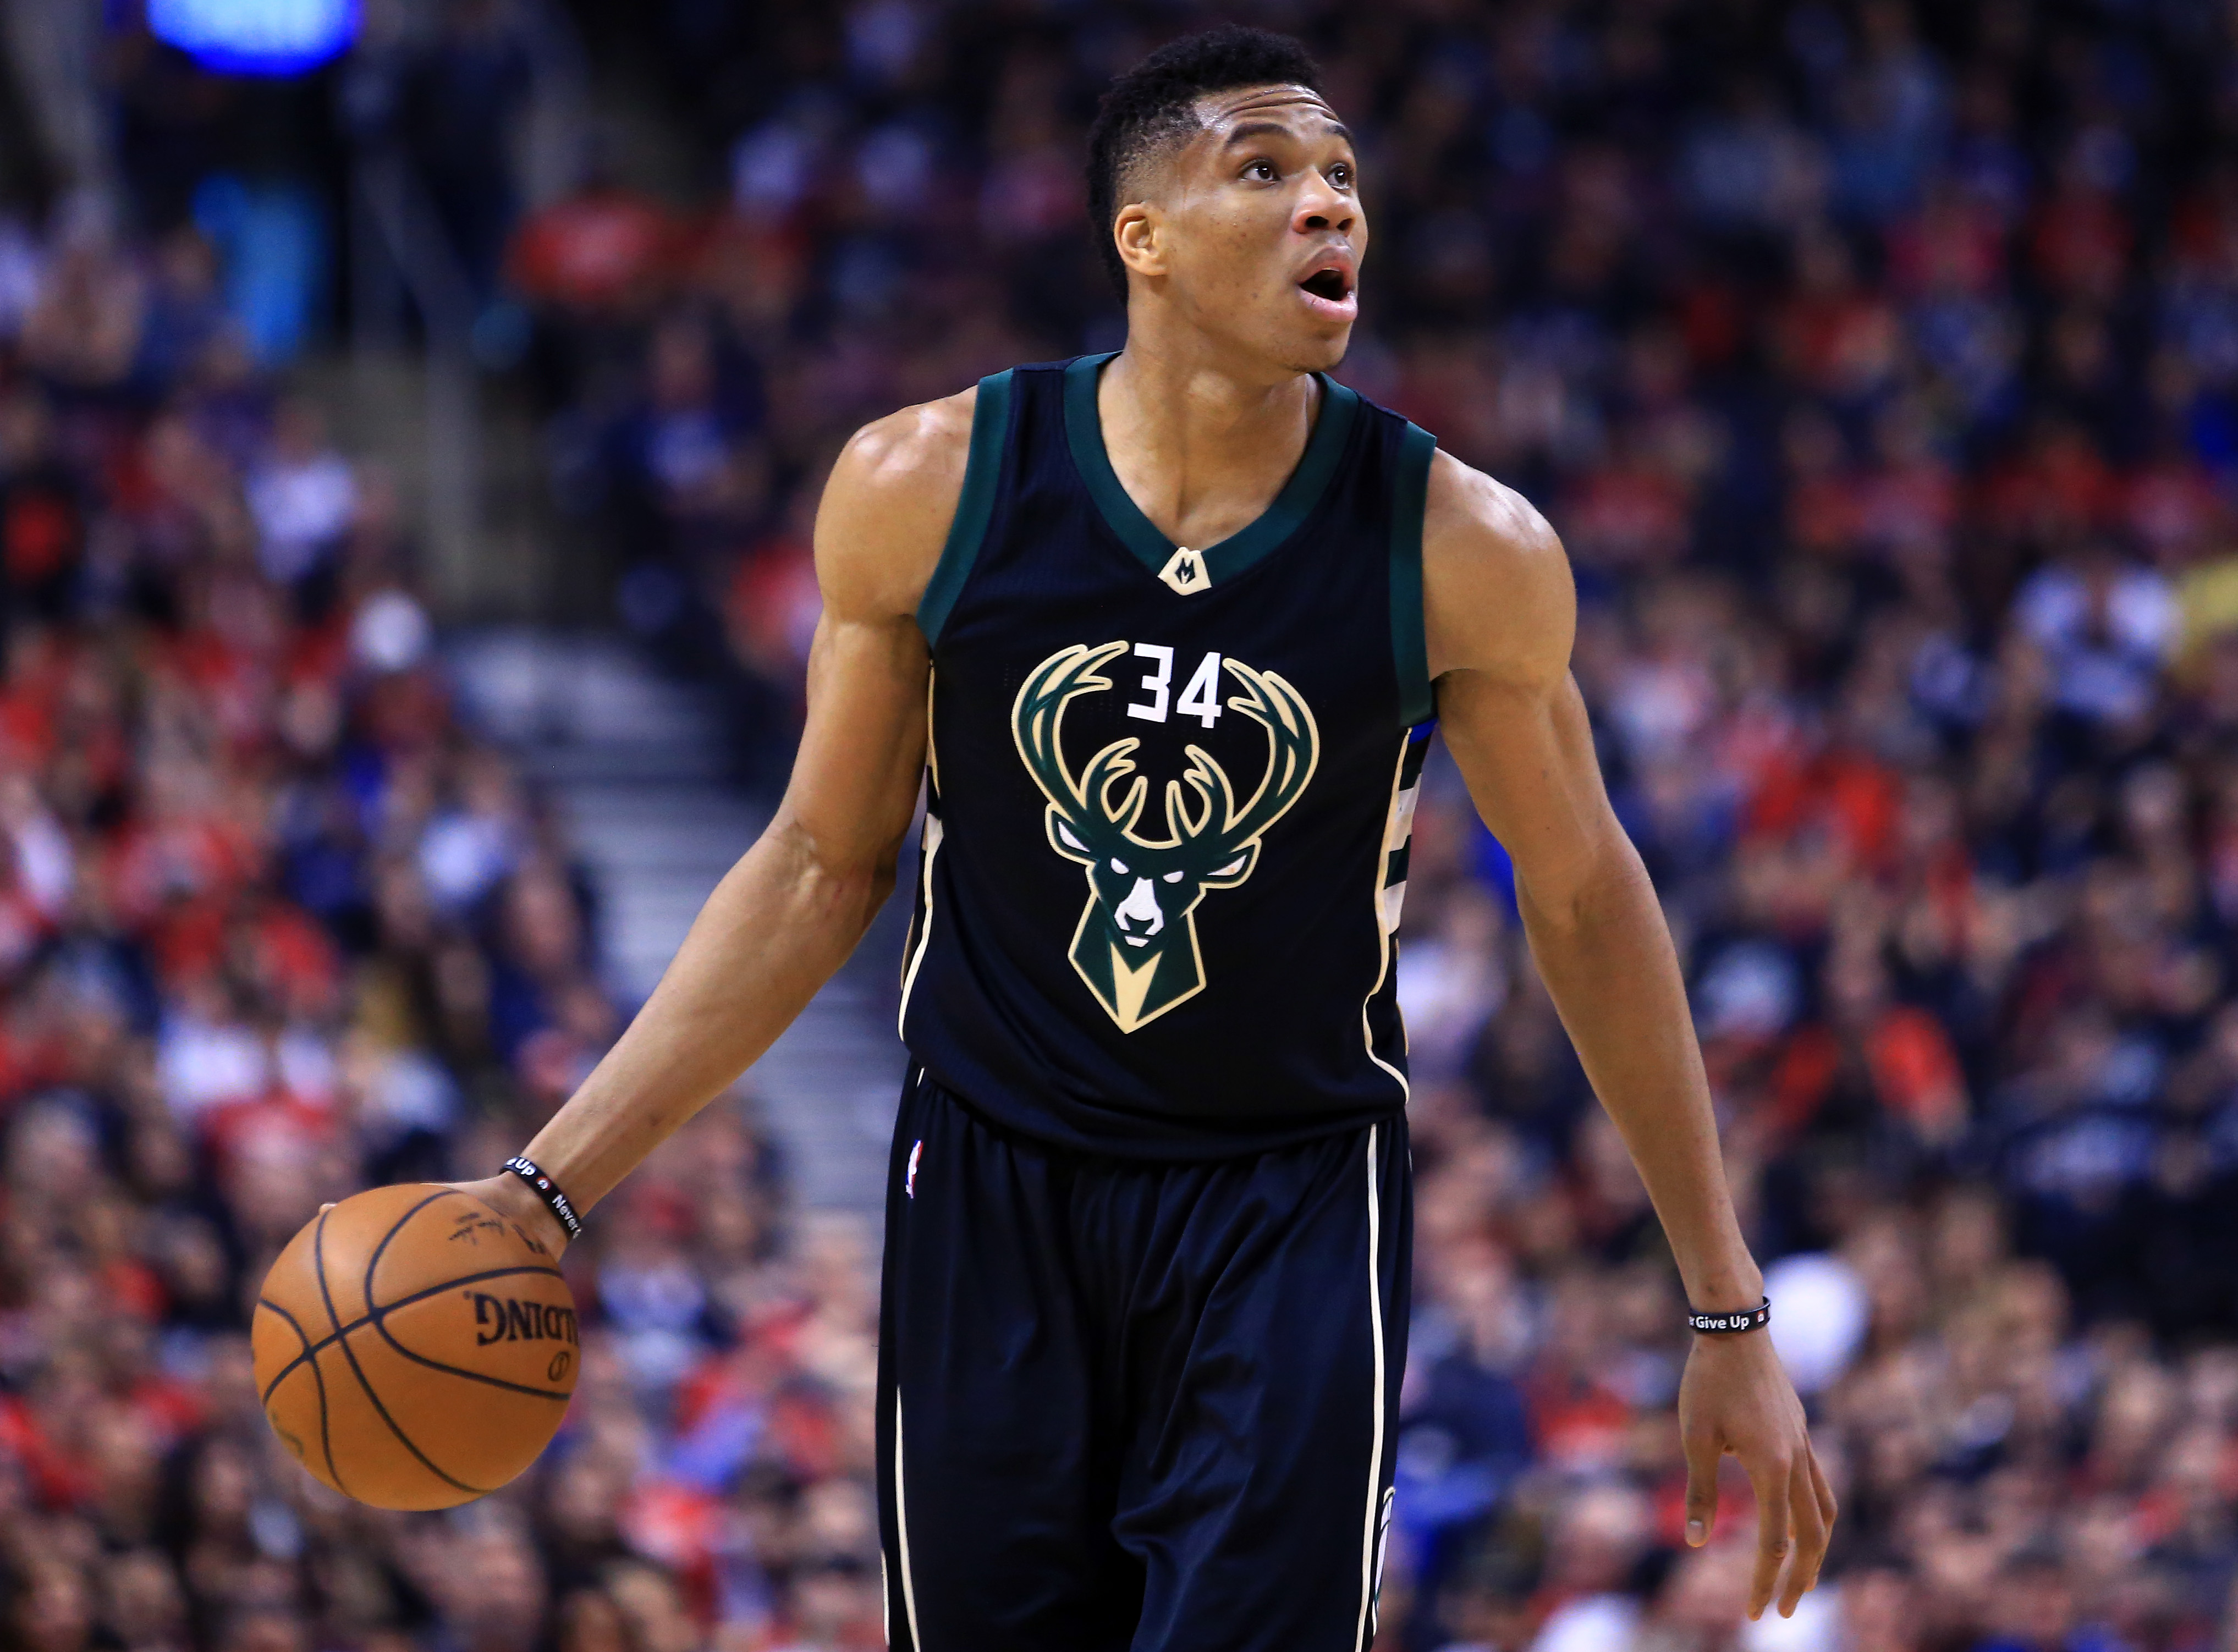 Russell Westbrook playing for the West Coast all-stars wins the KIA News  Photo - Getty Images